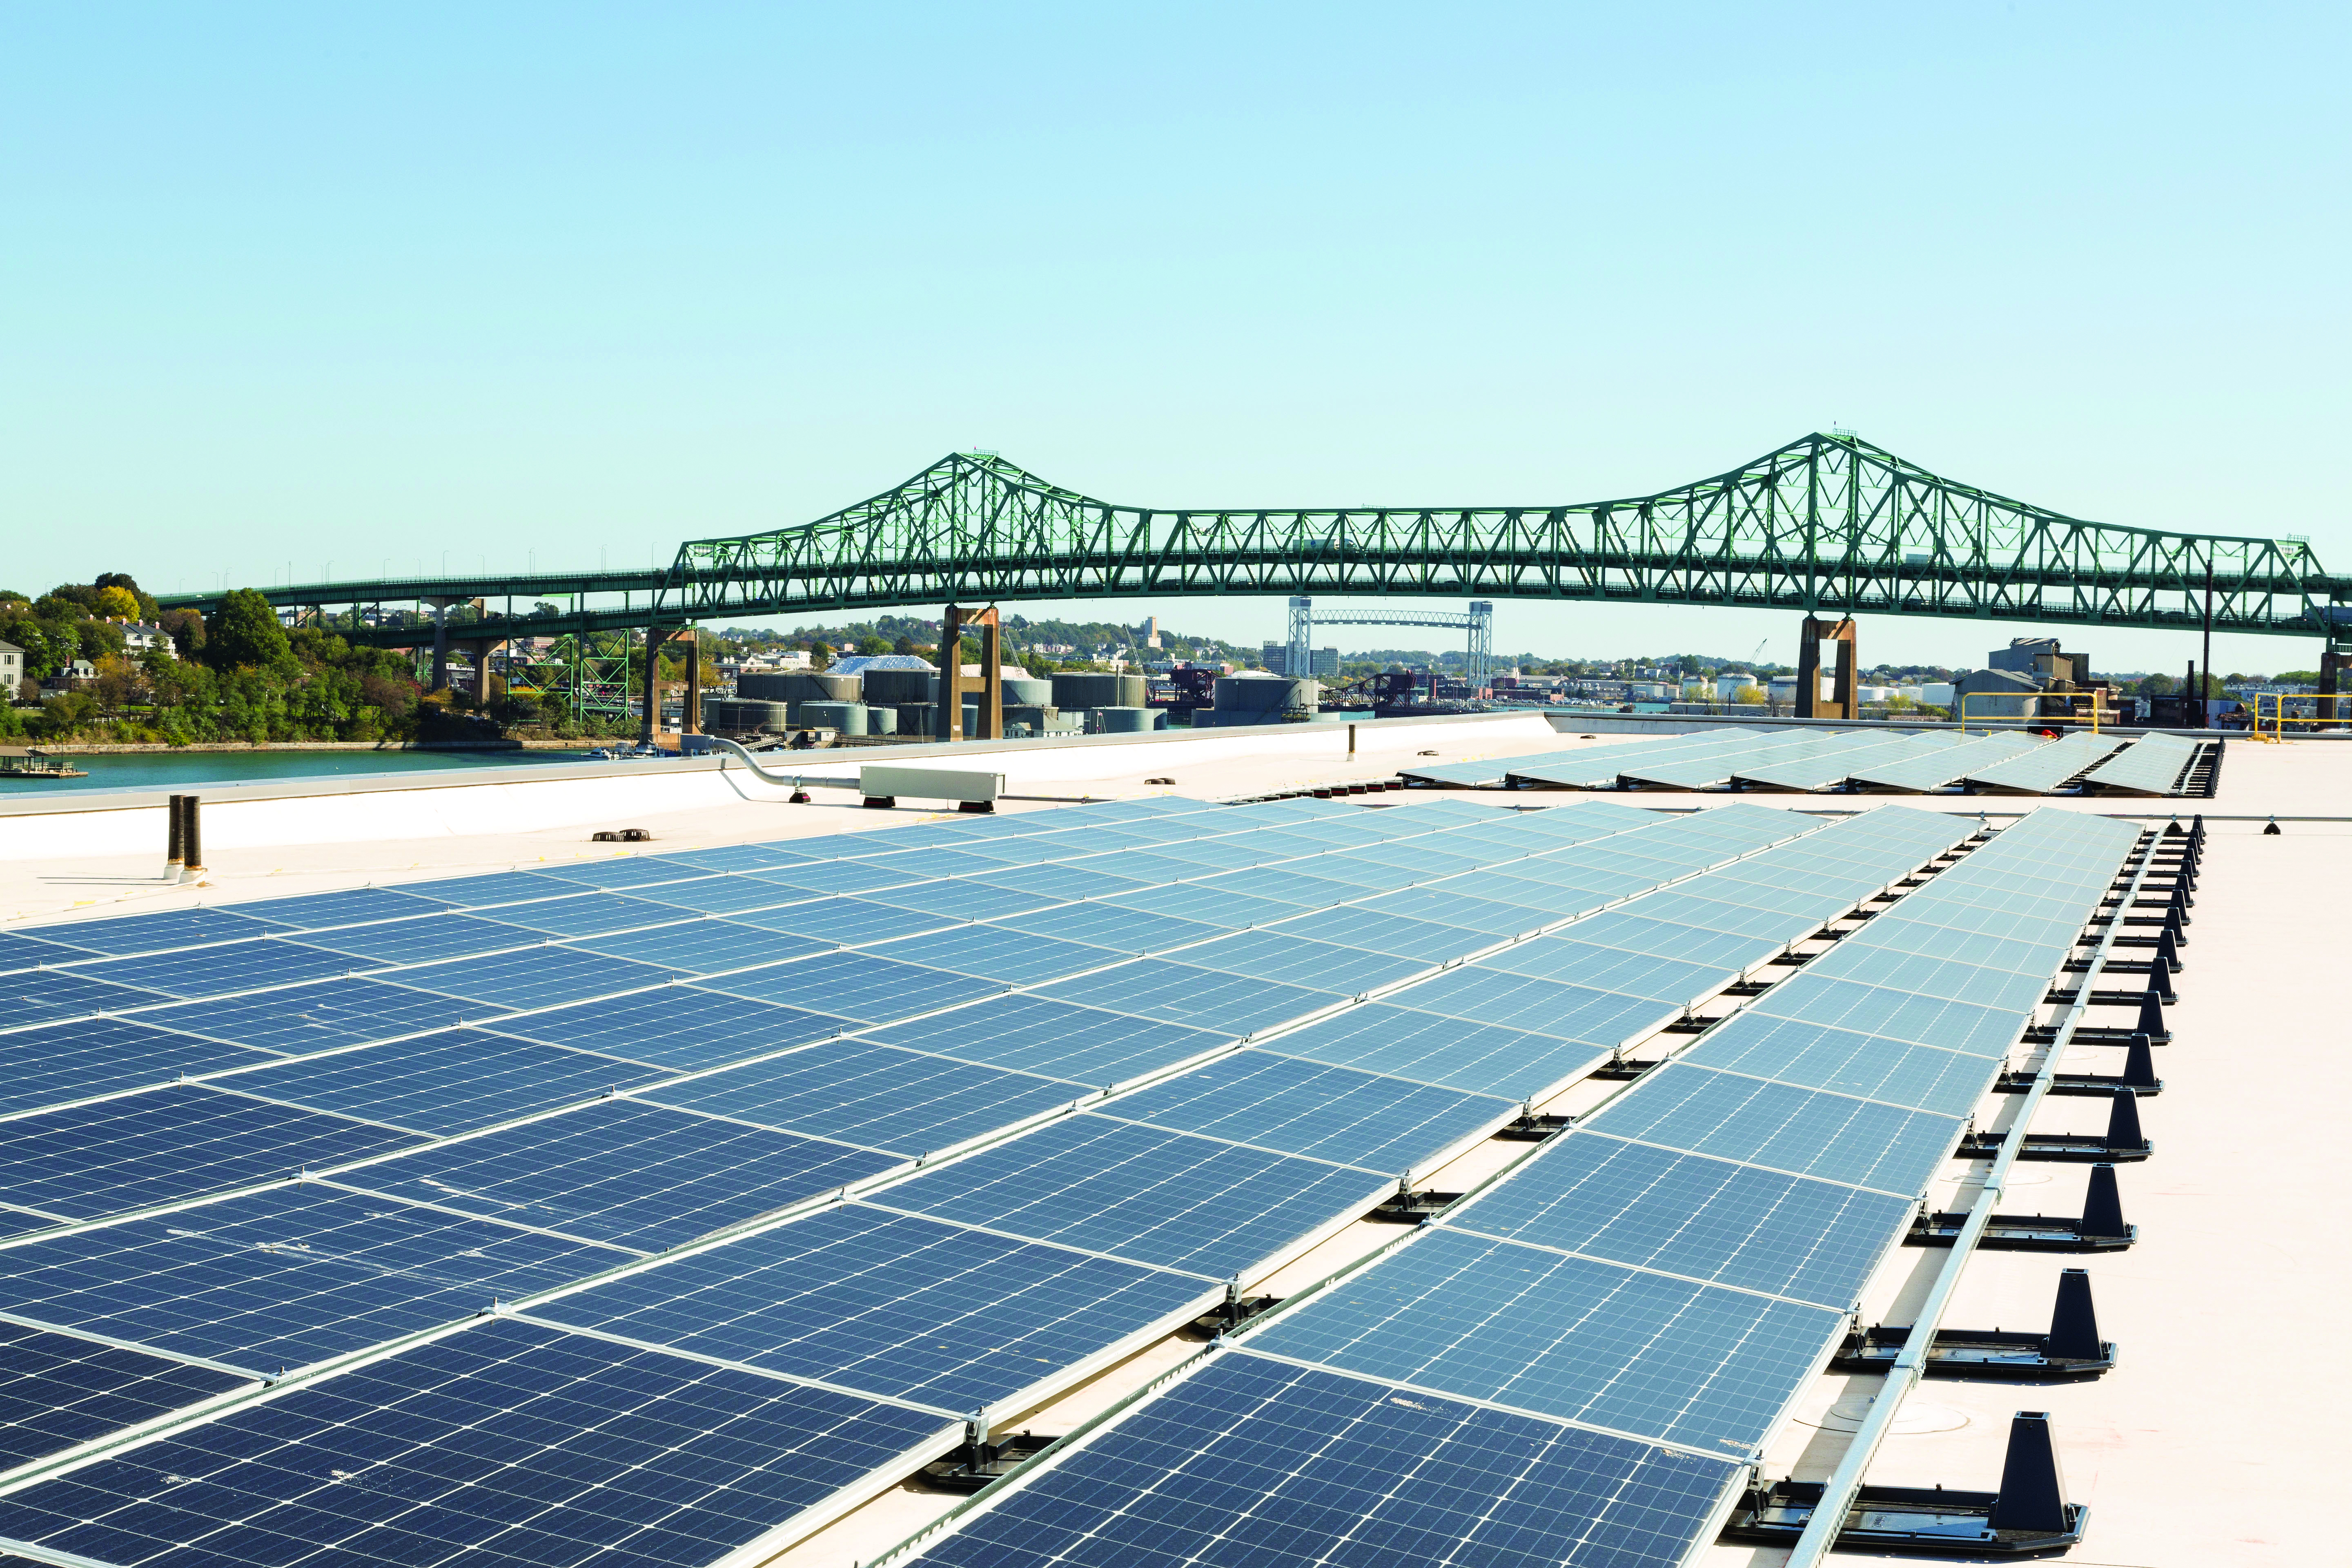 Solar panels on roof of Wind Technology Testing Center with Tobin Bridge in background